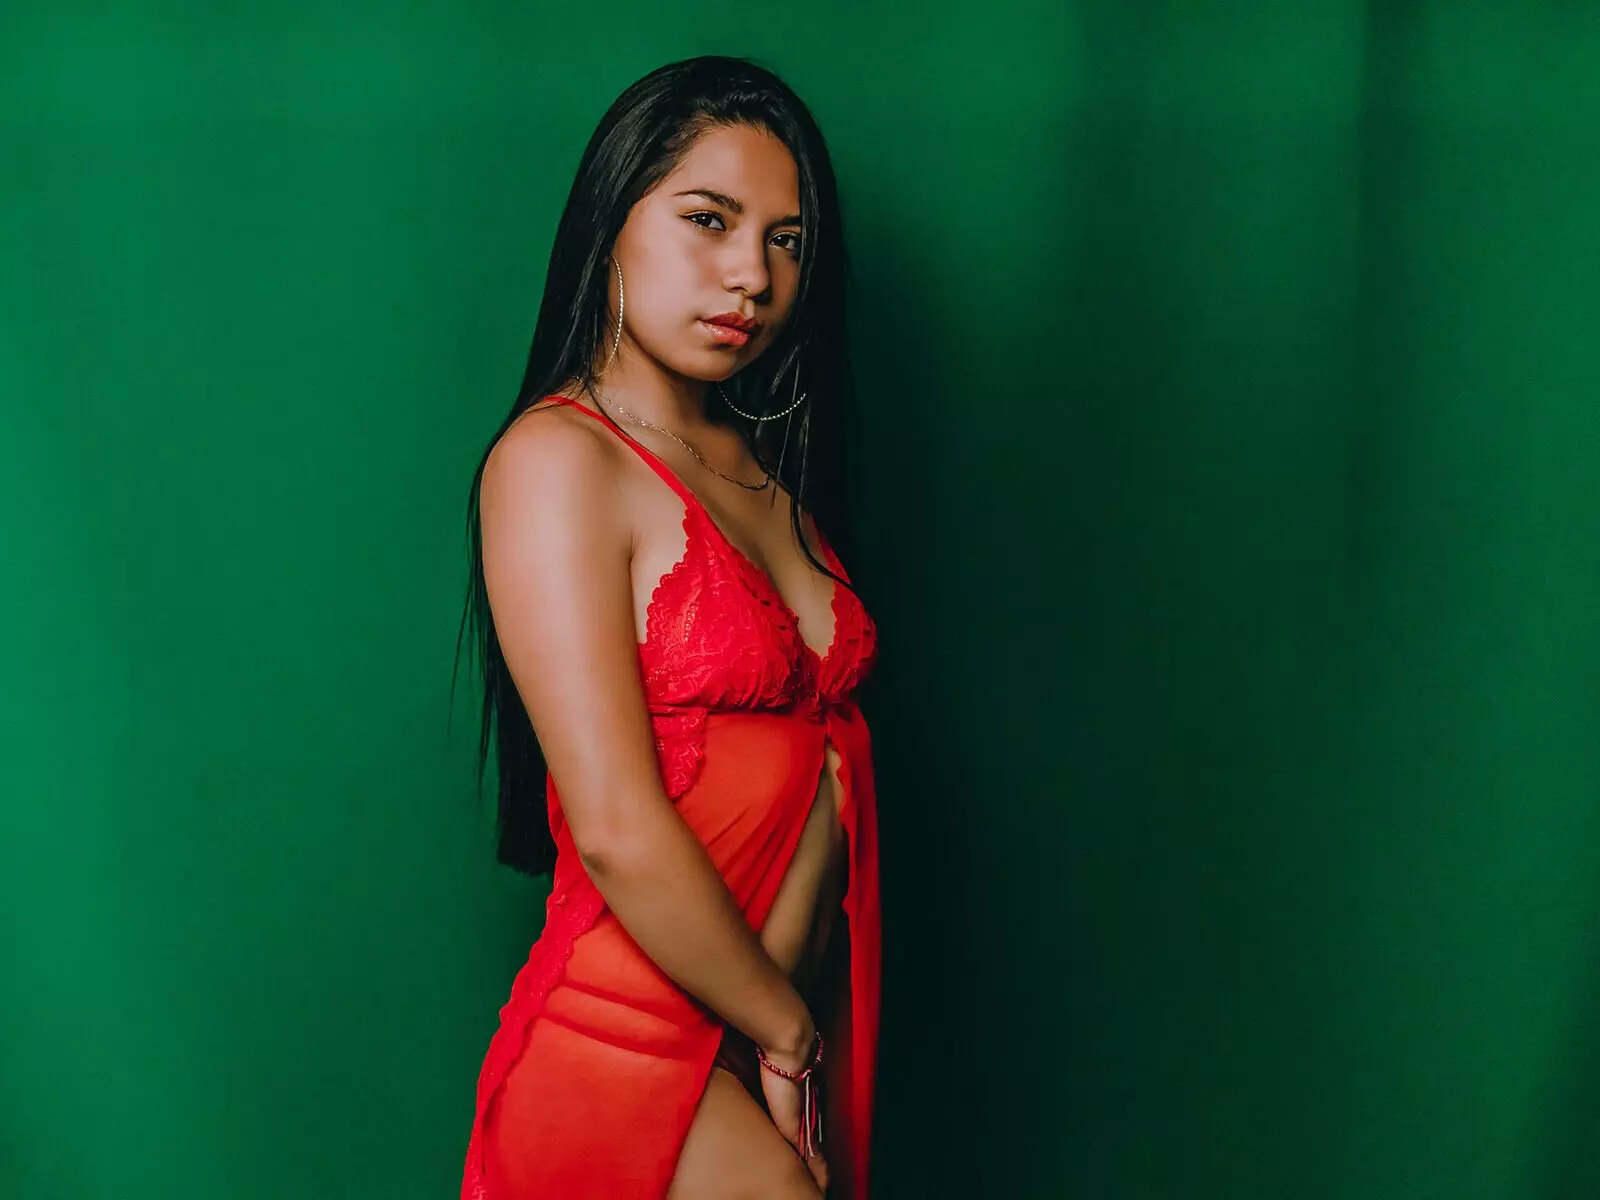 View more of IsabellNavarro